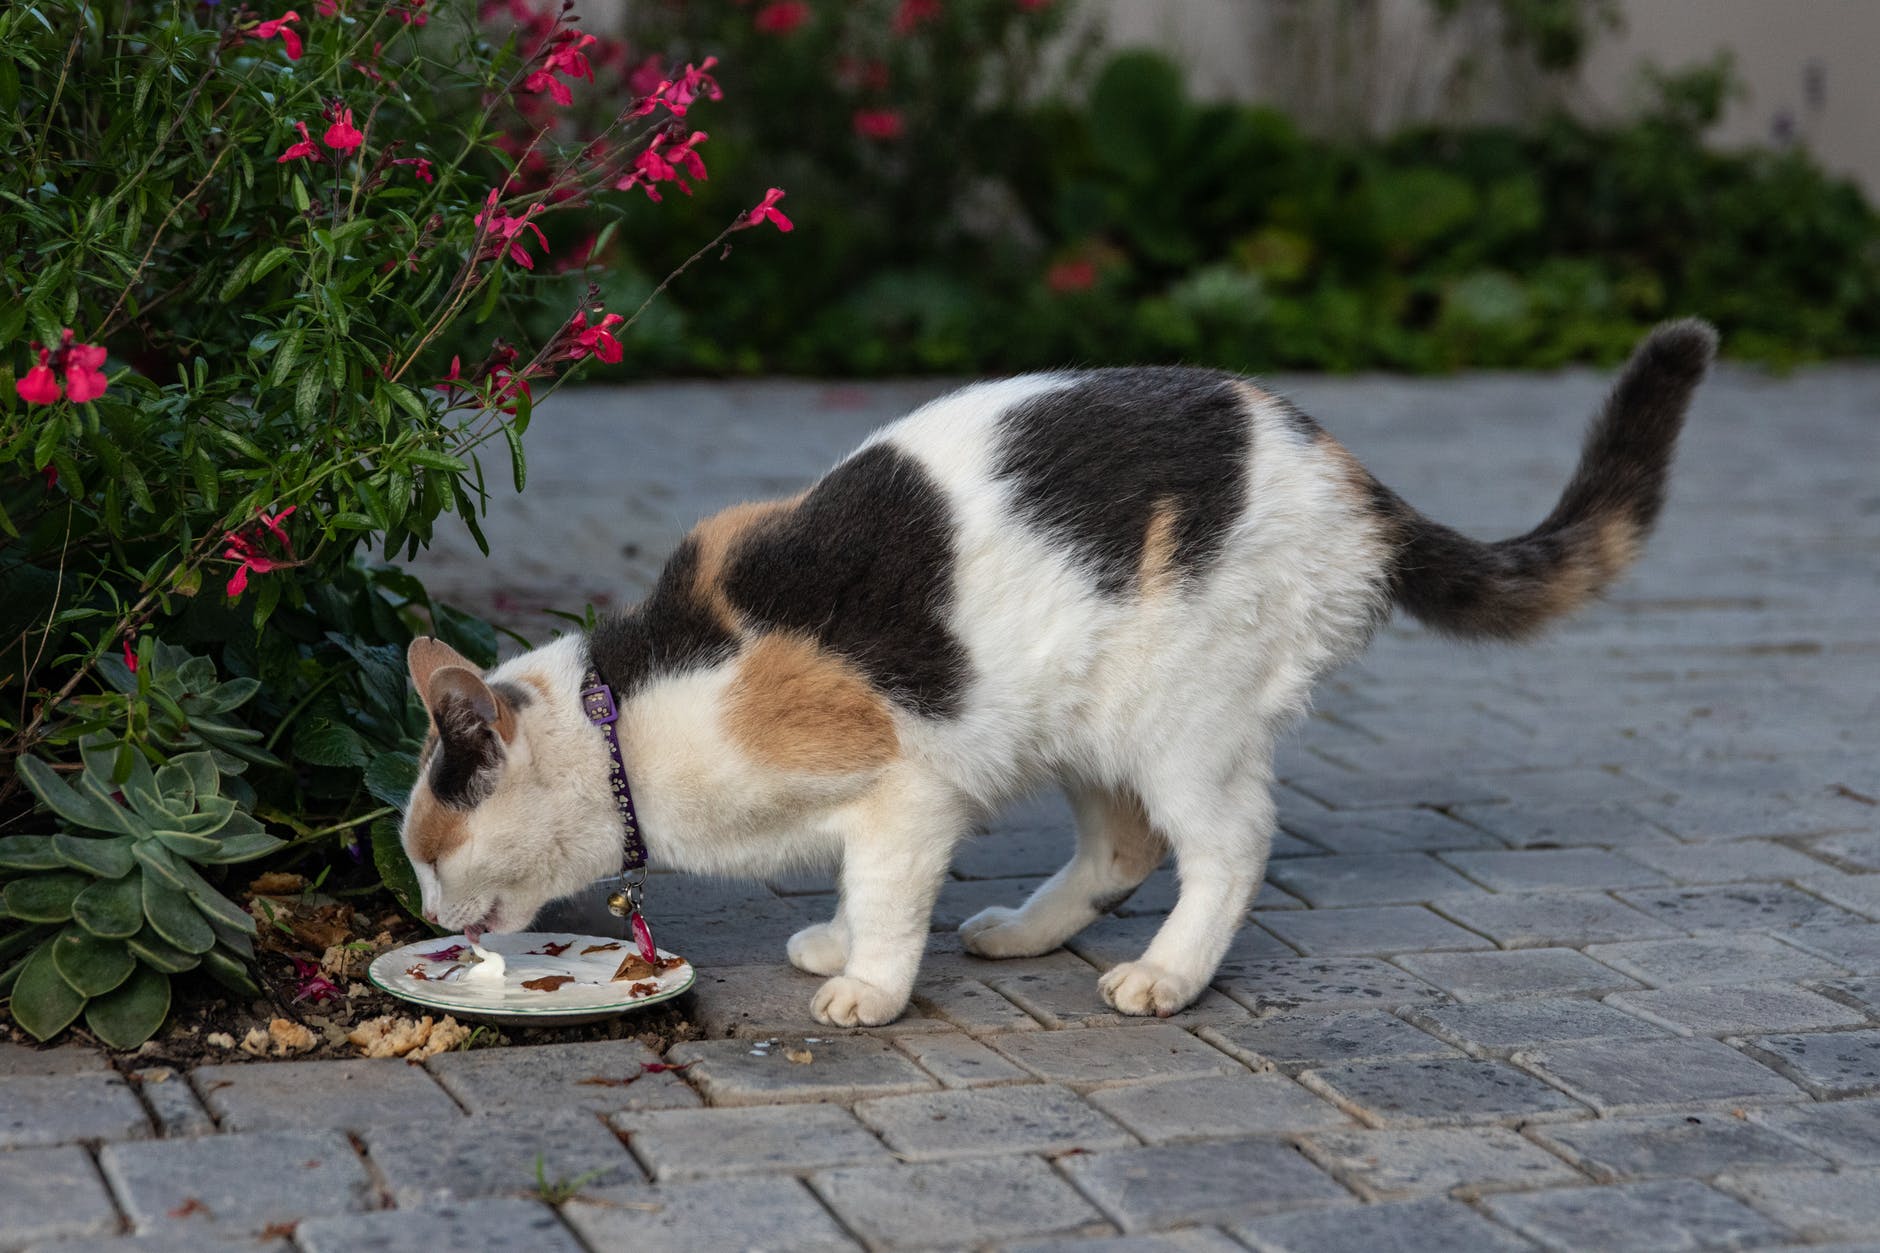 FEEDING YOUR CAT : Things to keep in mind